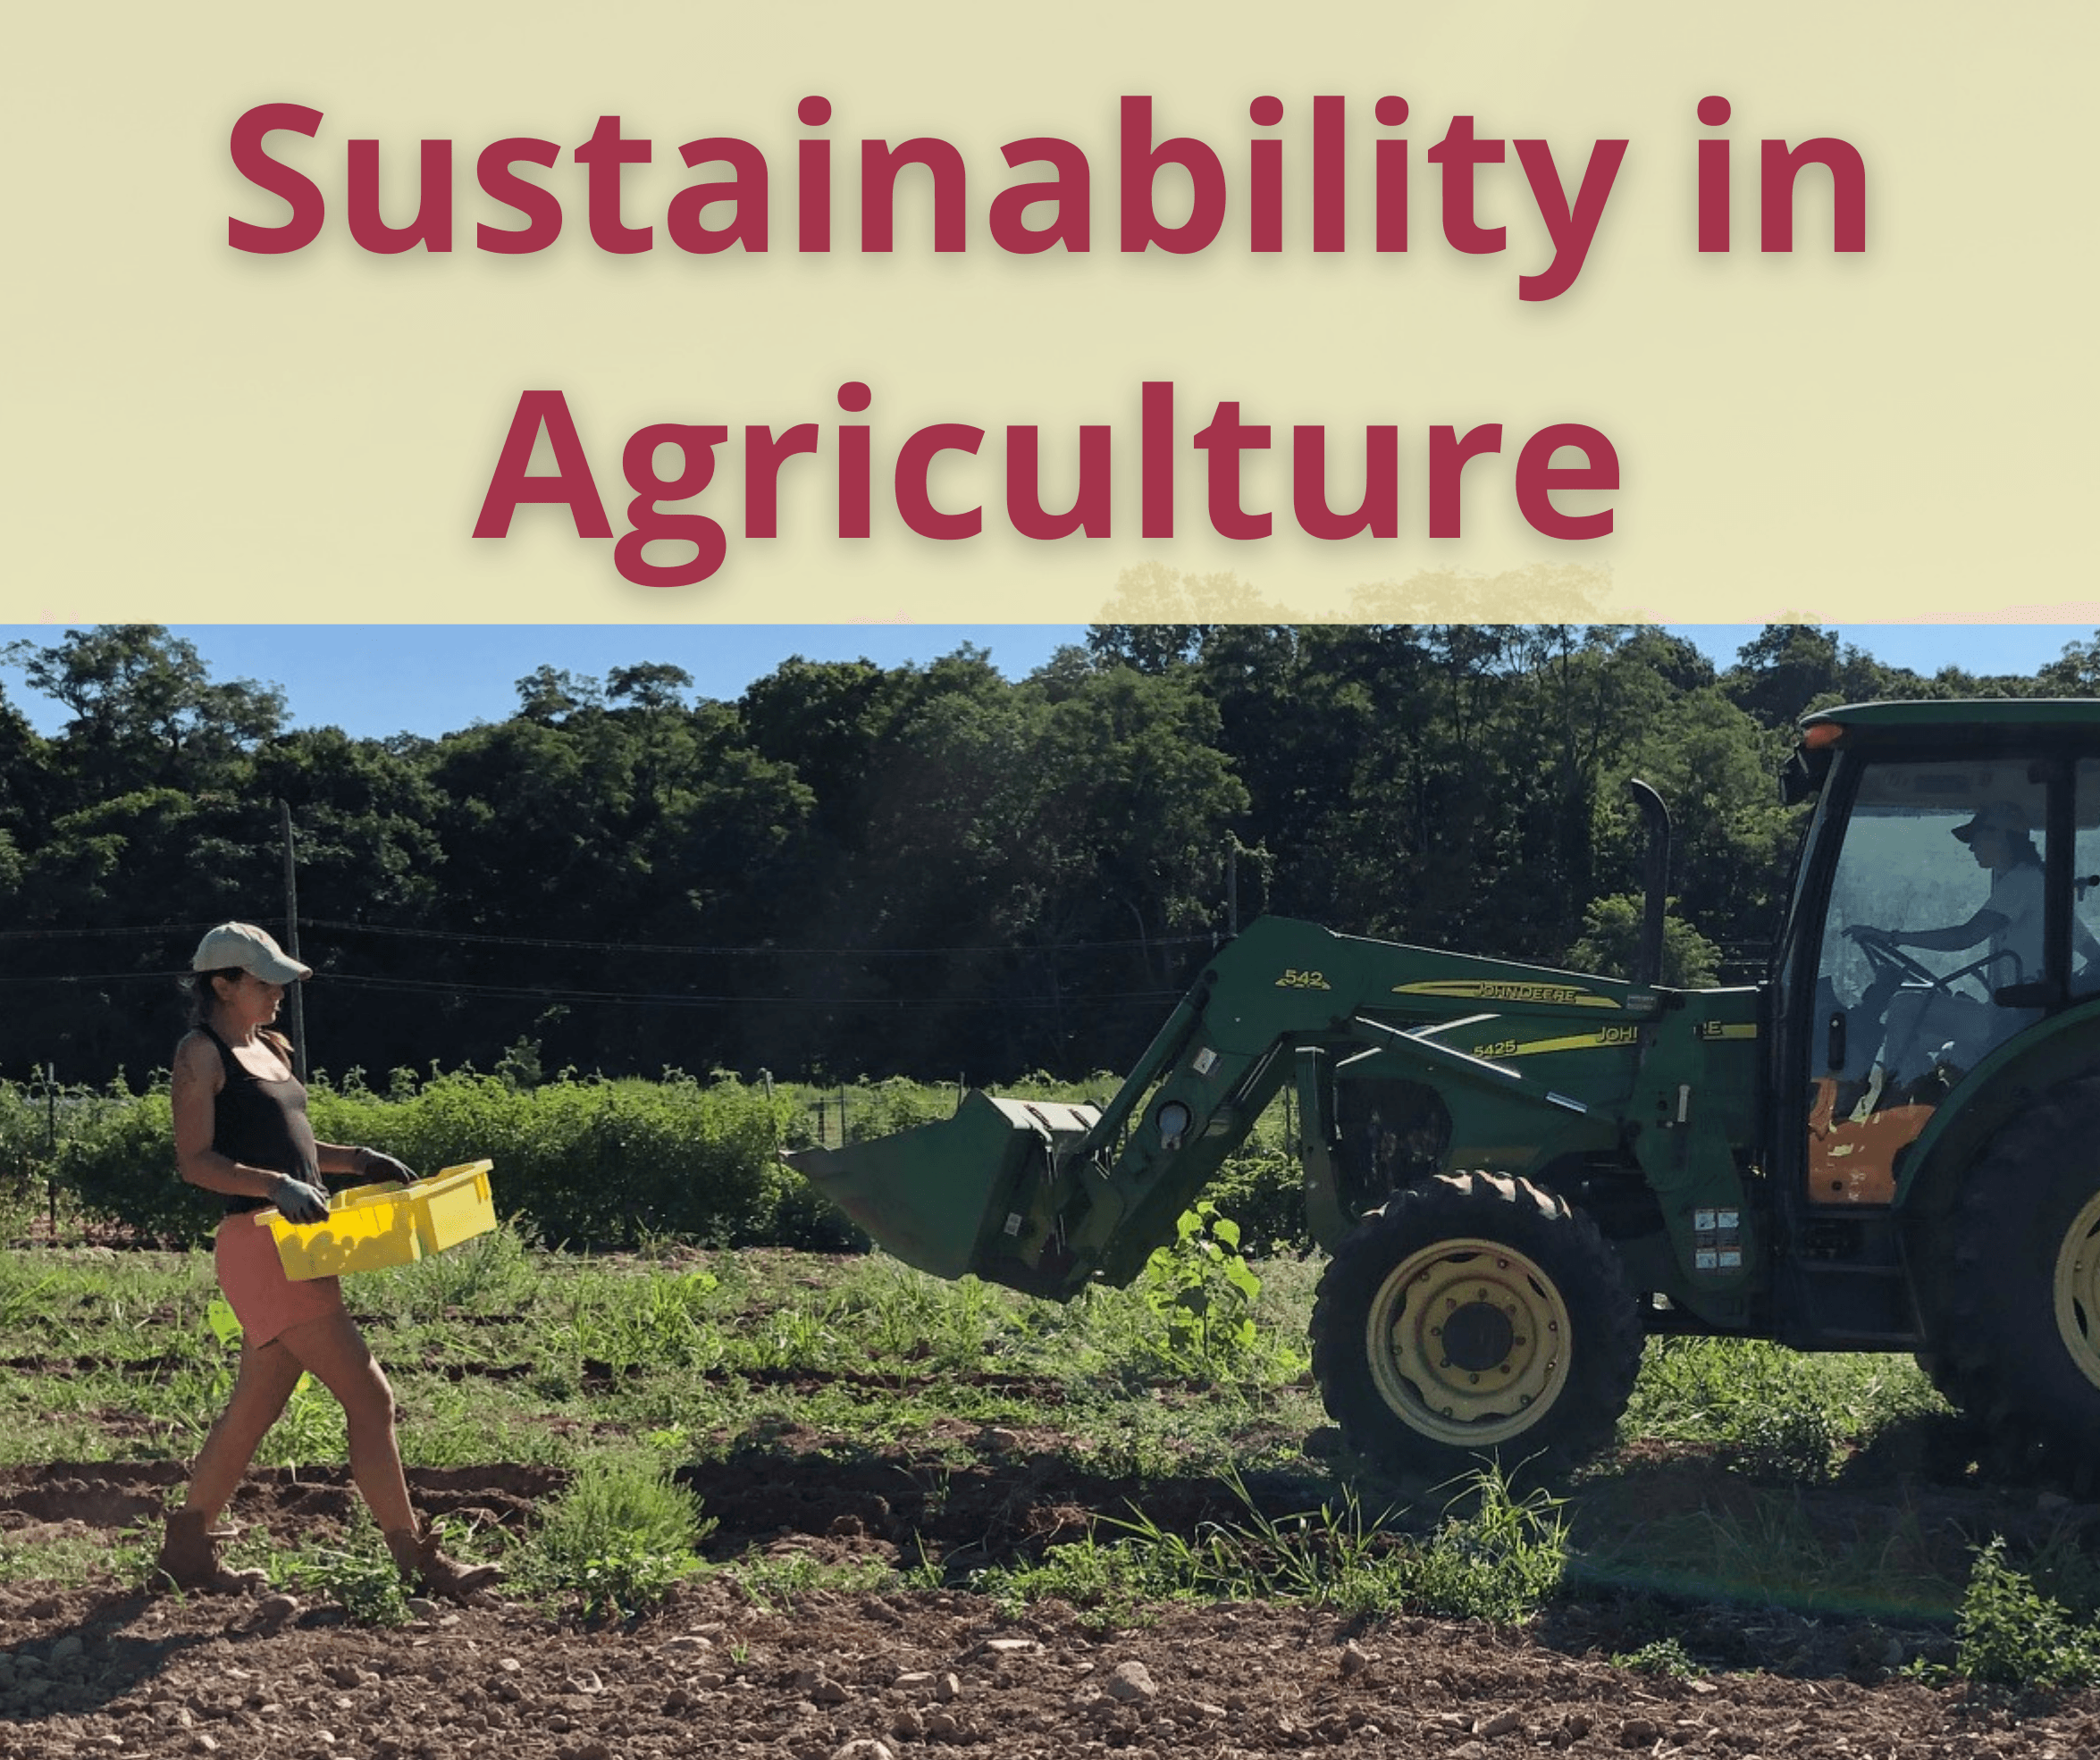 Sustainability in Agriculture: 9 - 12